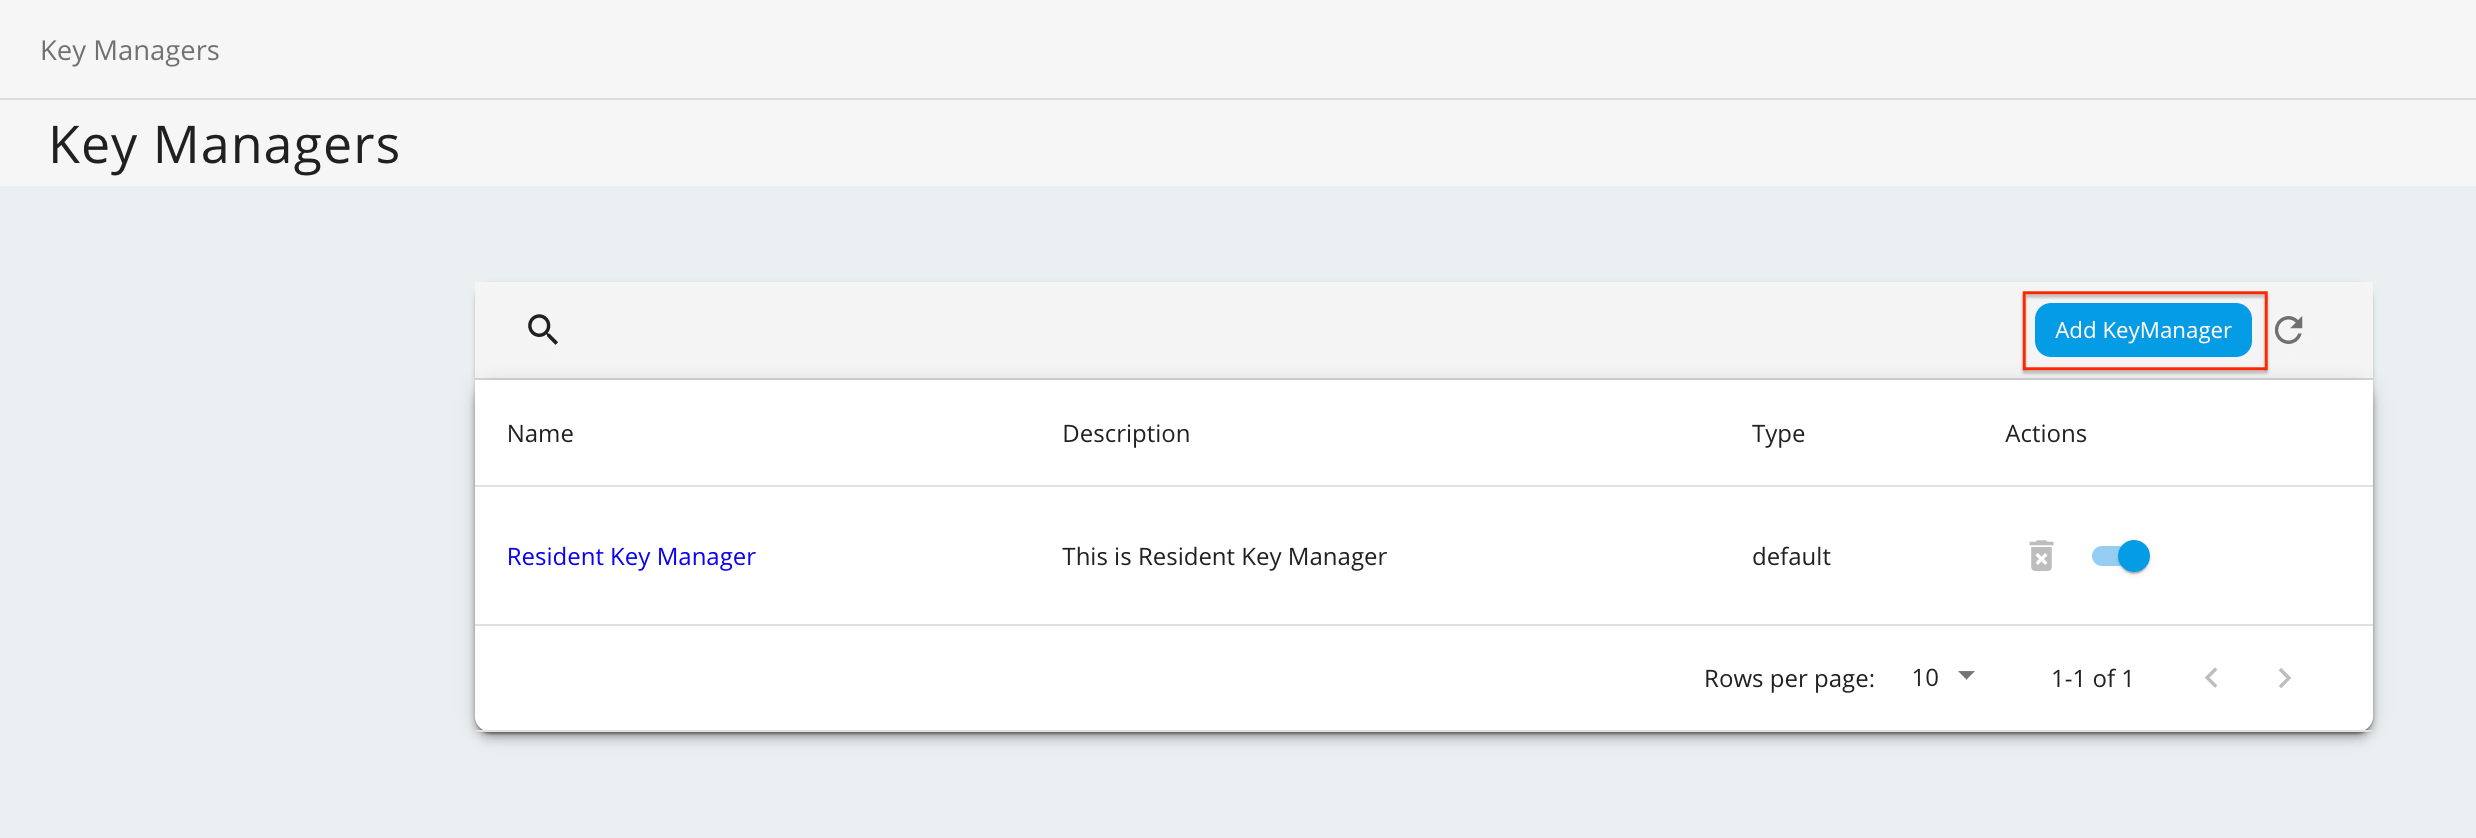 Add new Key Manager